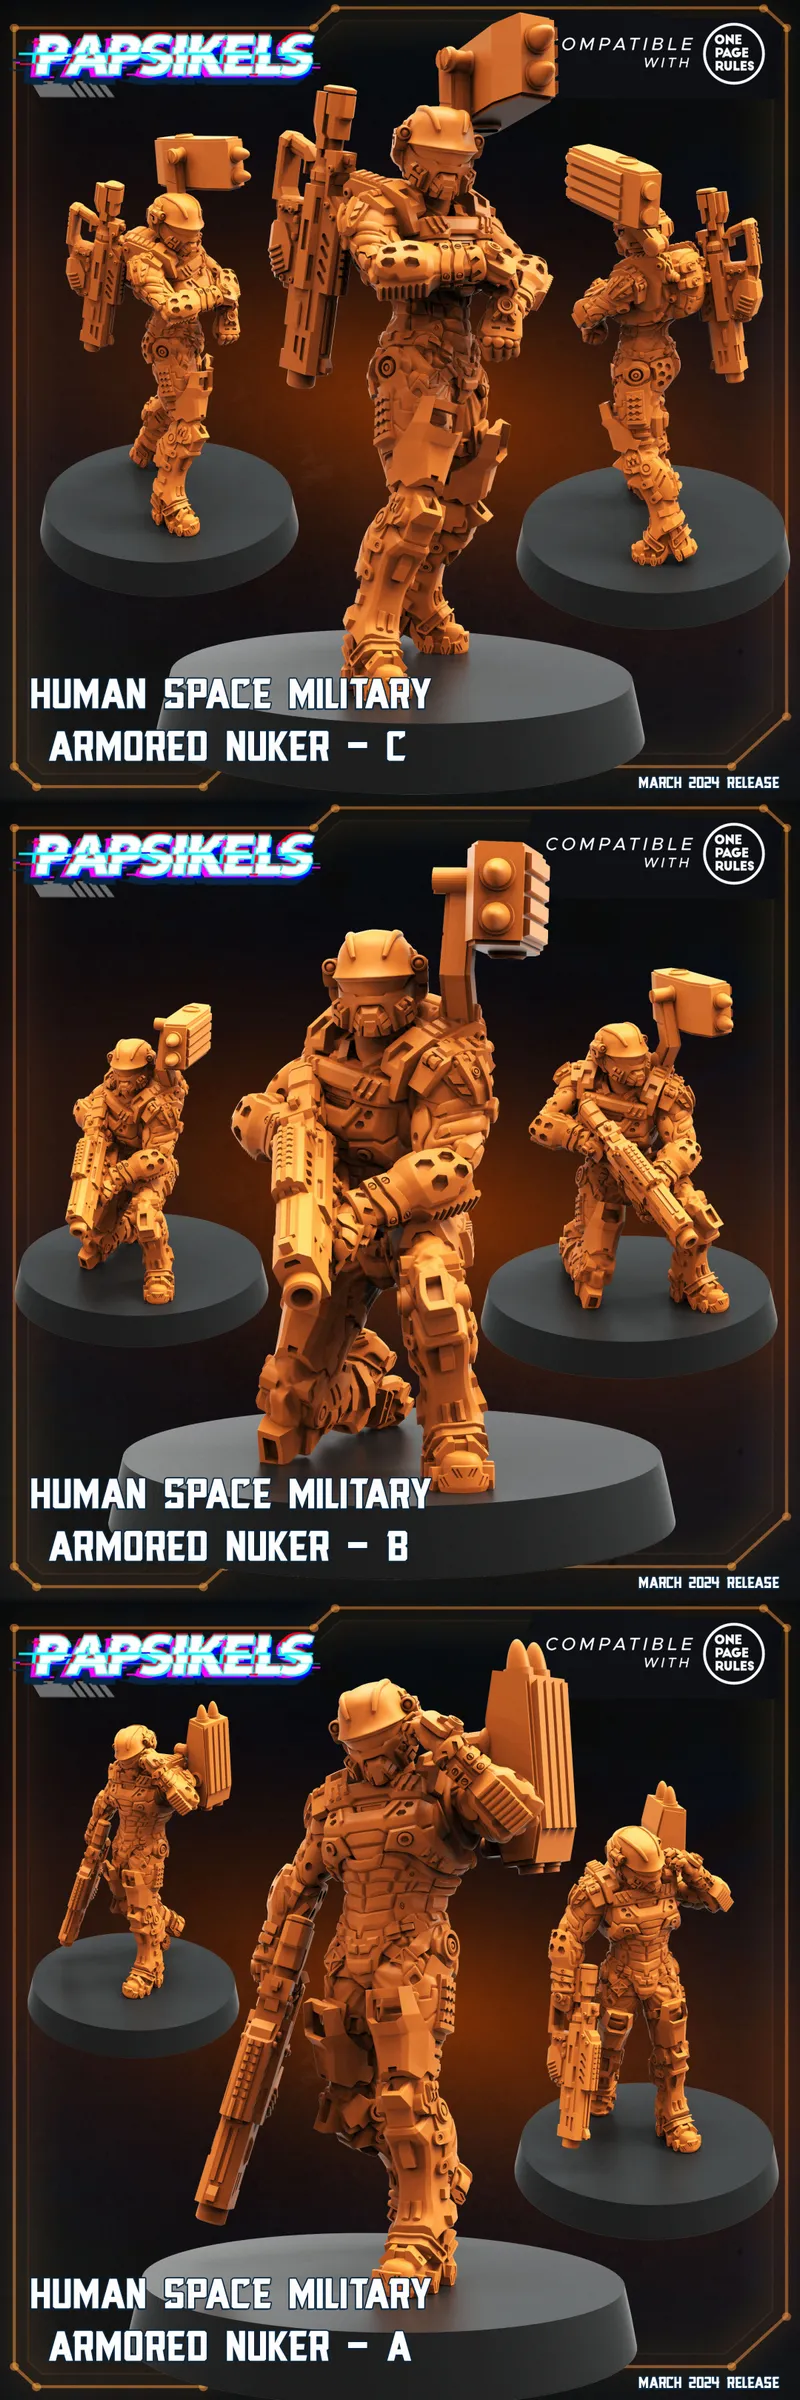 HUMAN SPACE MILITARY ARMORED NUKERS